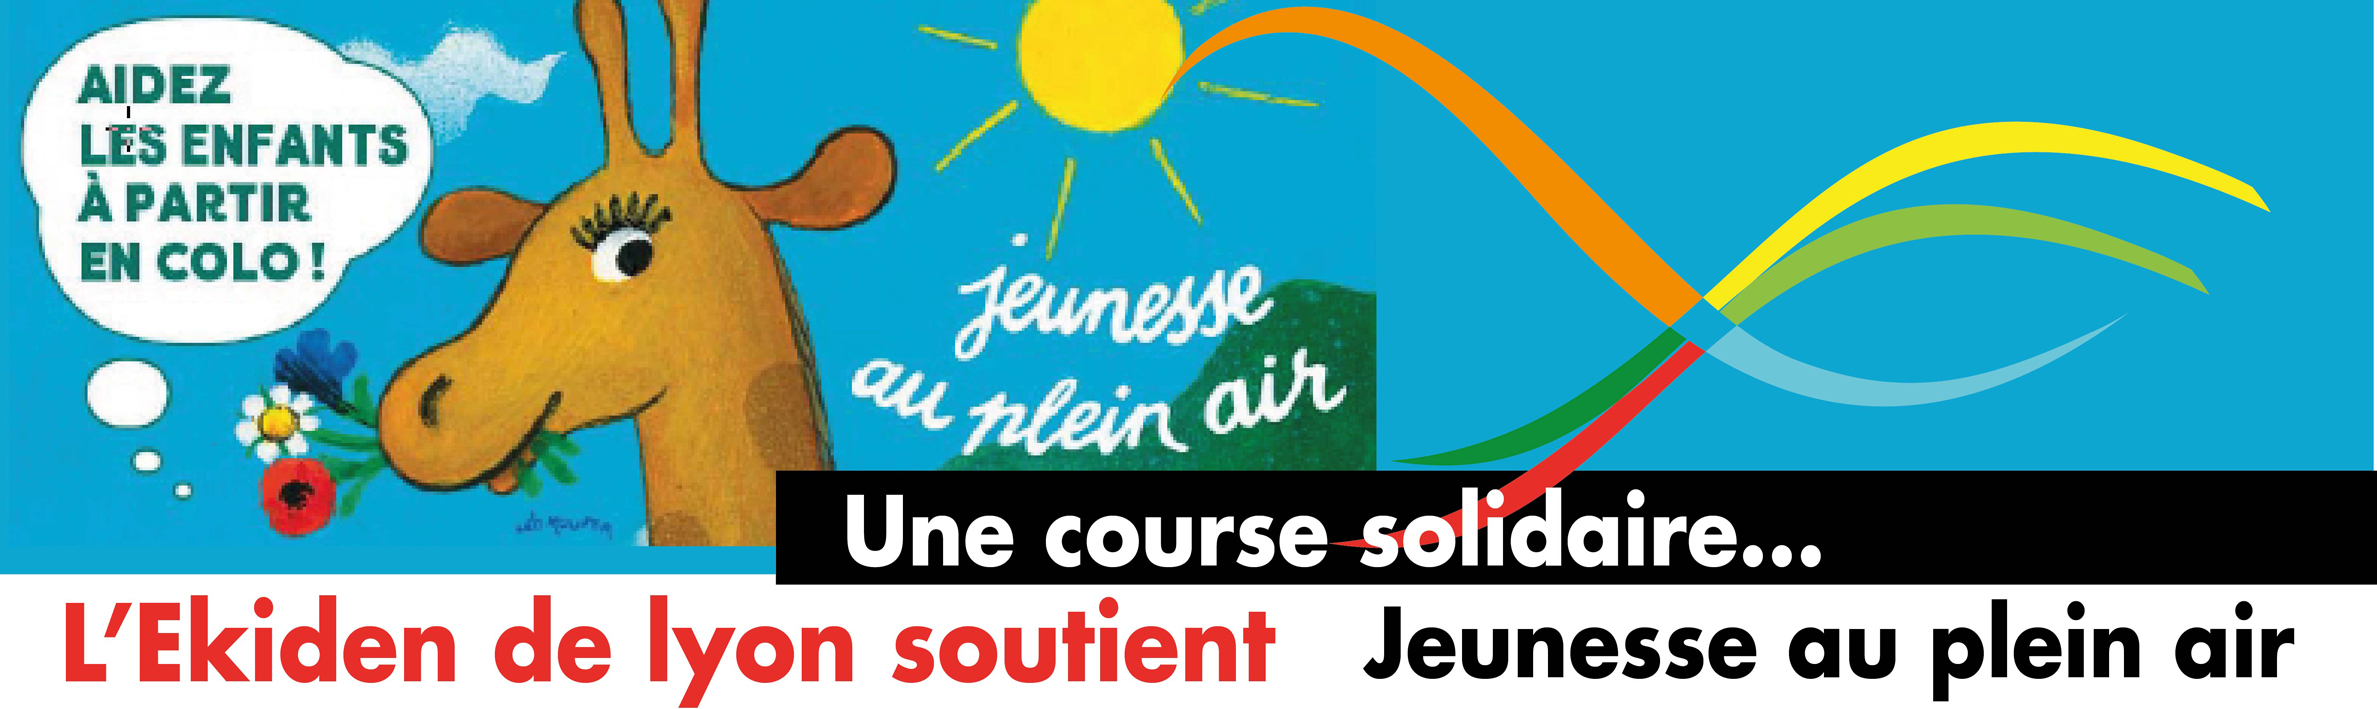 coursesolidaire.jpg